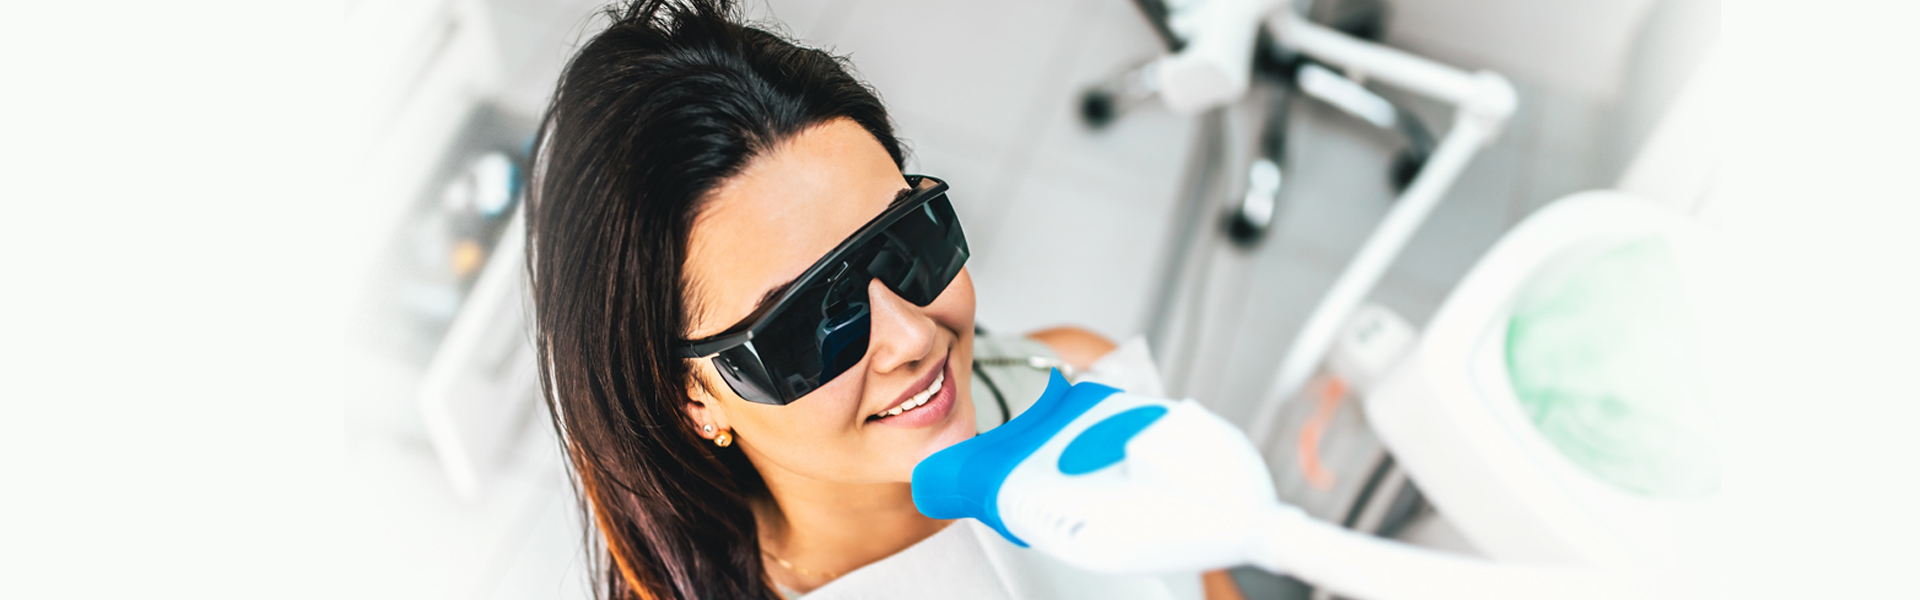 Laser Dentistry 101: Everything You Need to Know